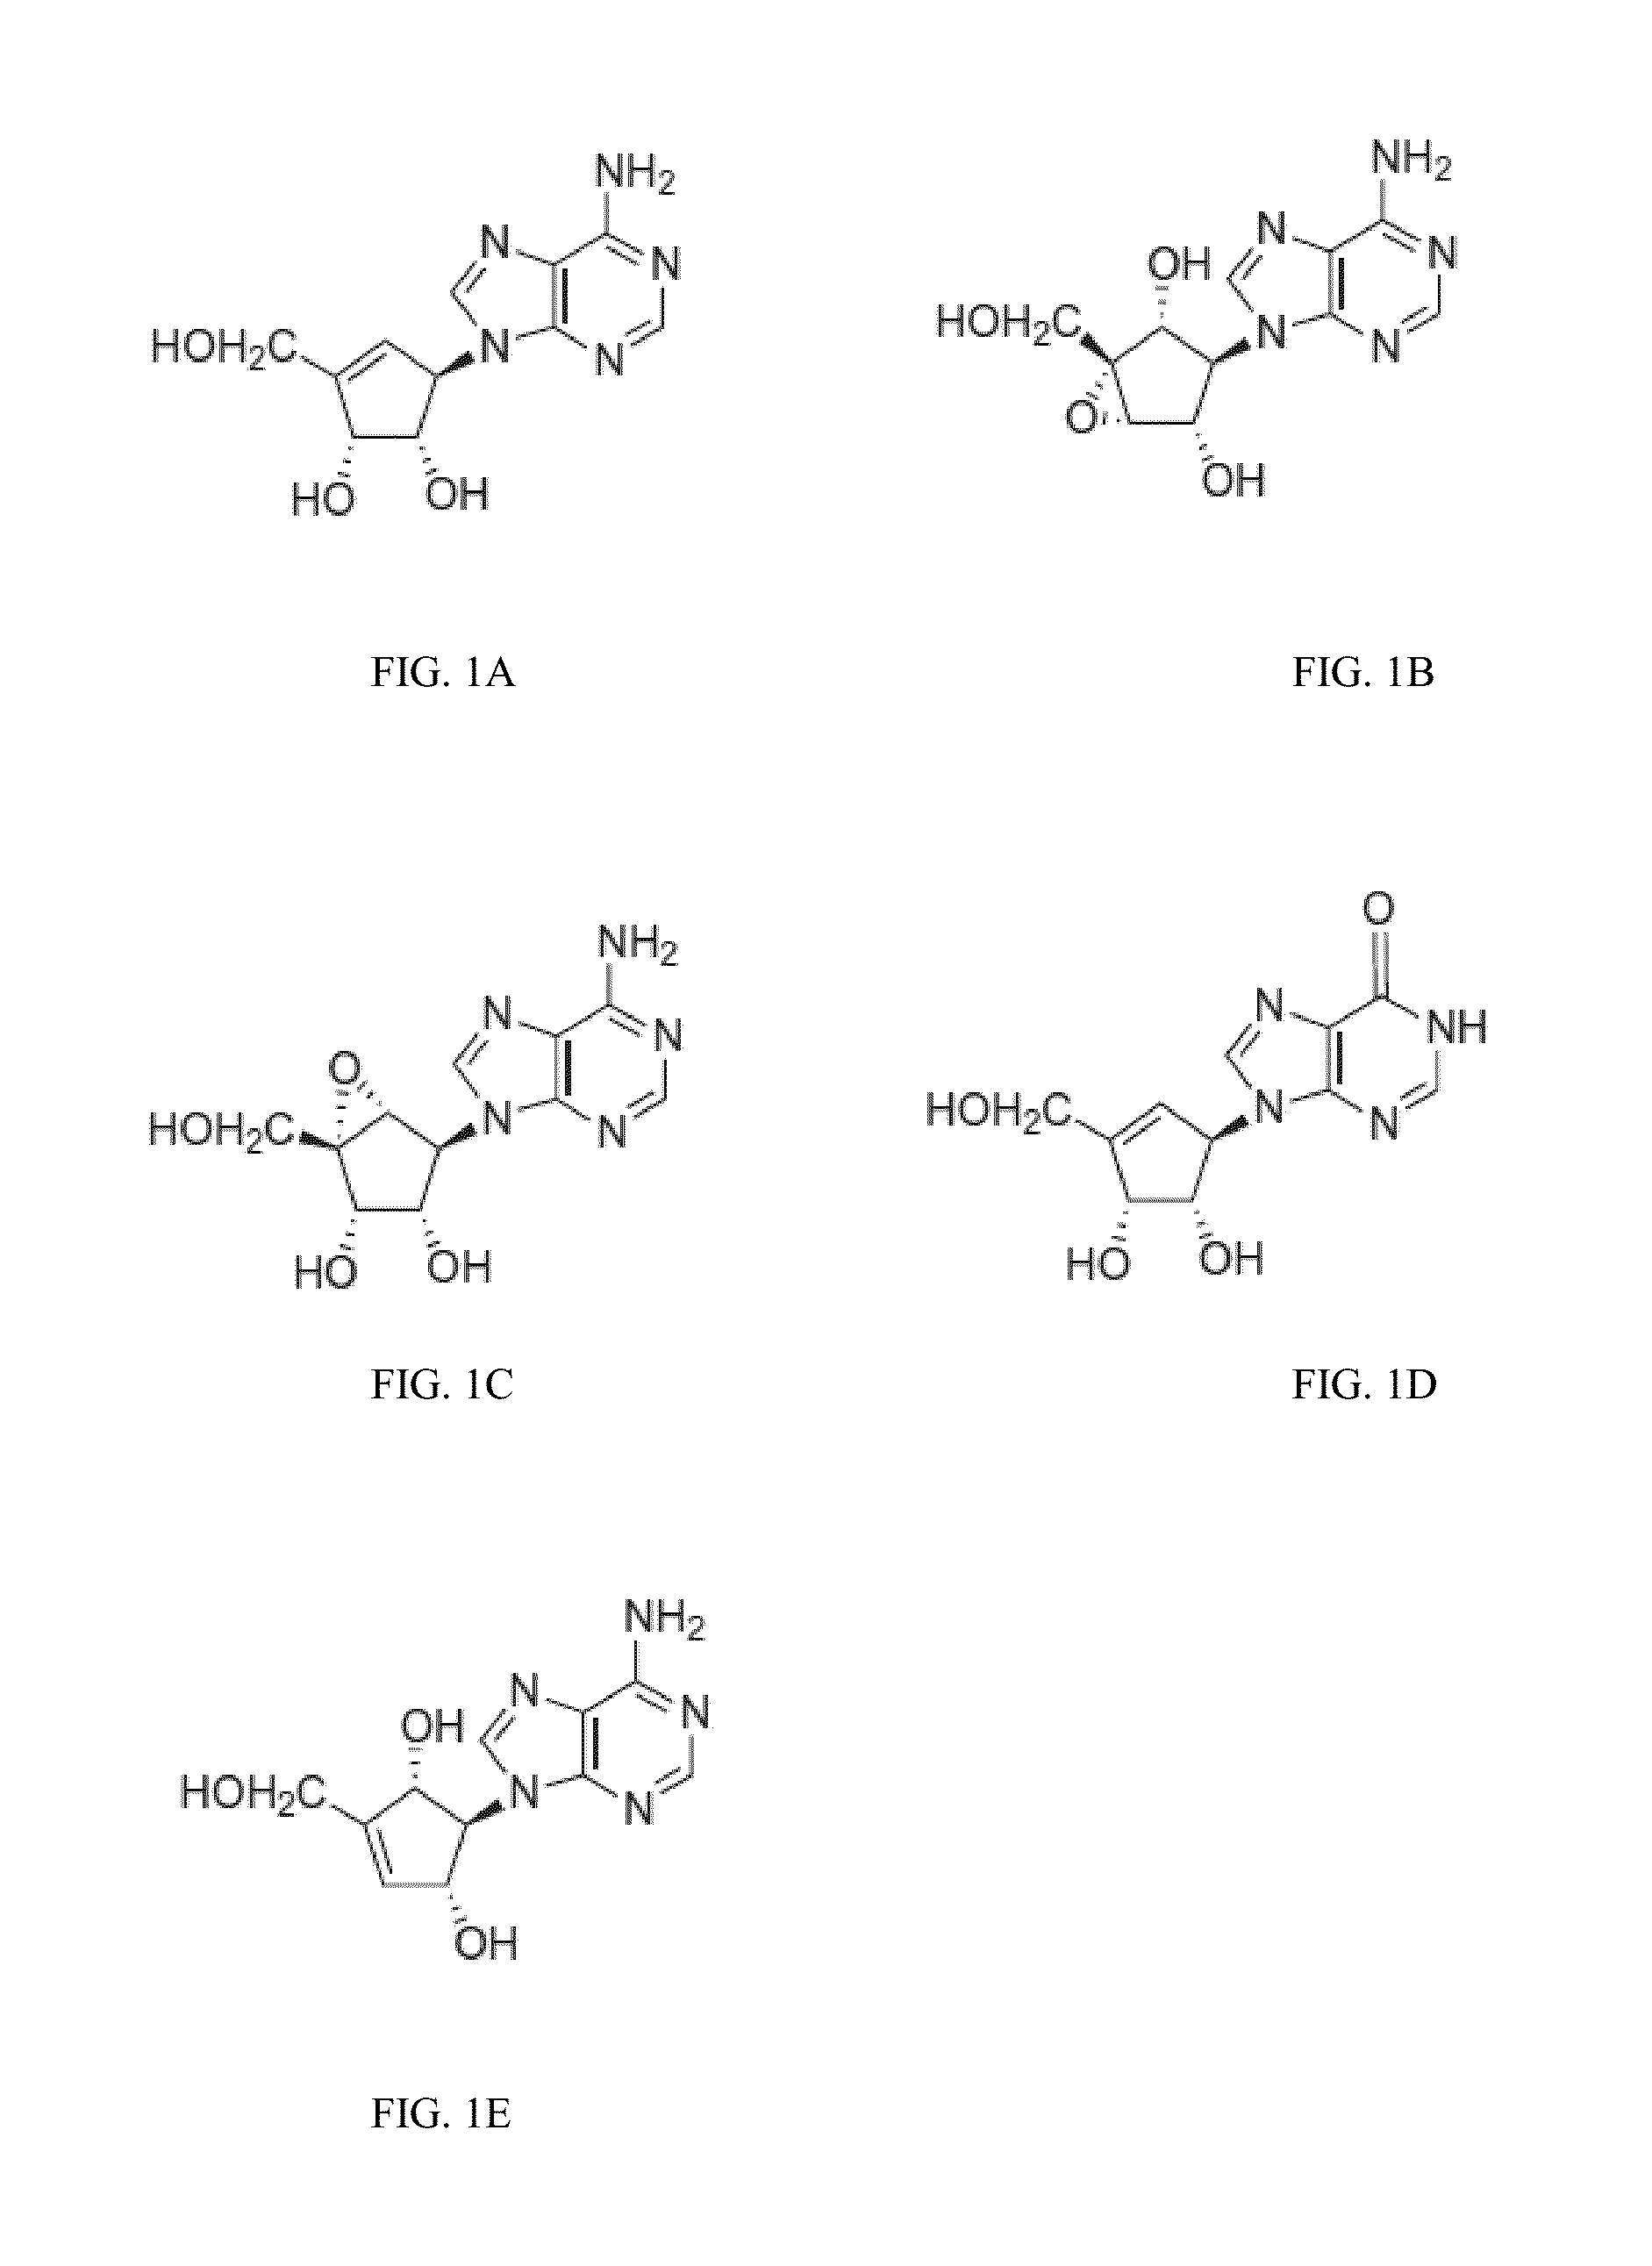 Enantiomers of the 1',6'-isomer of neplanocin a